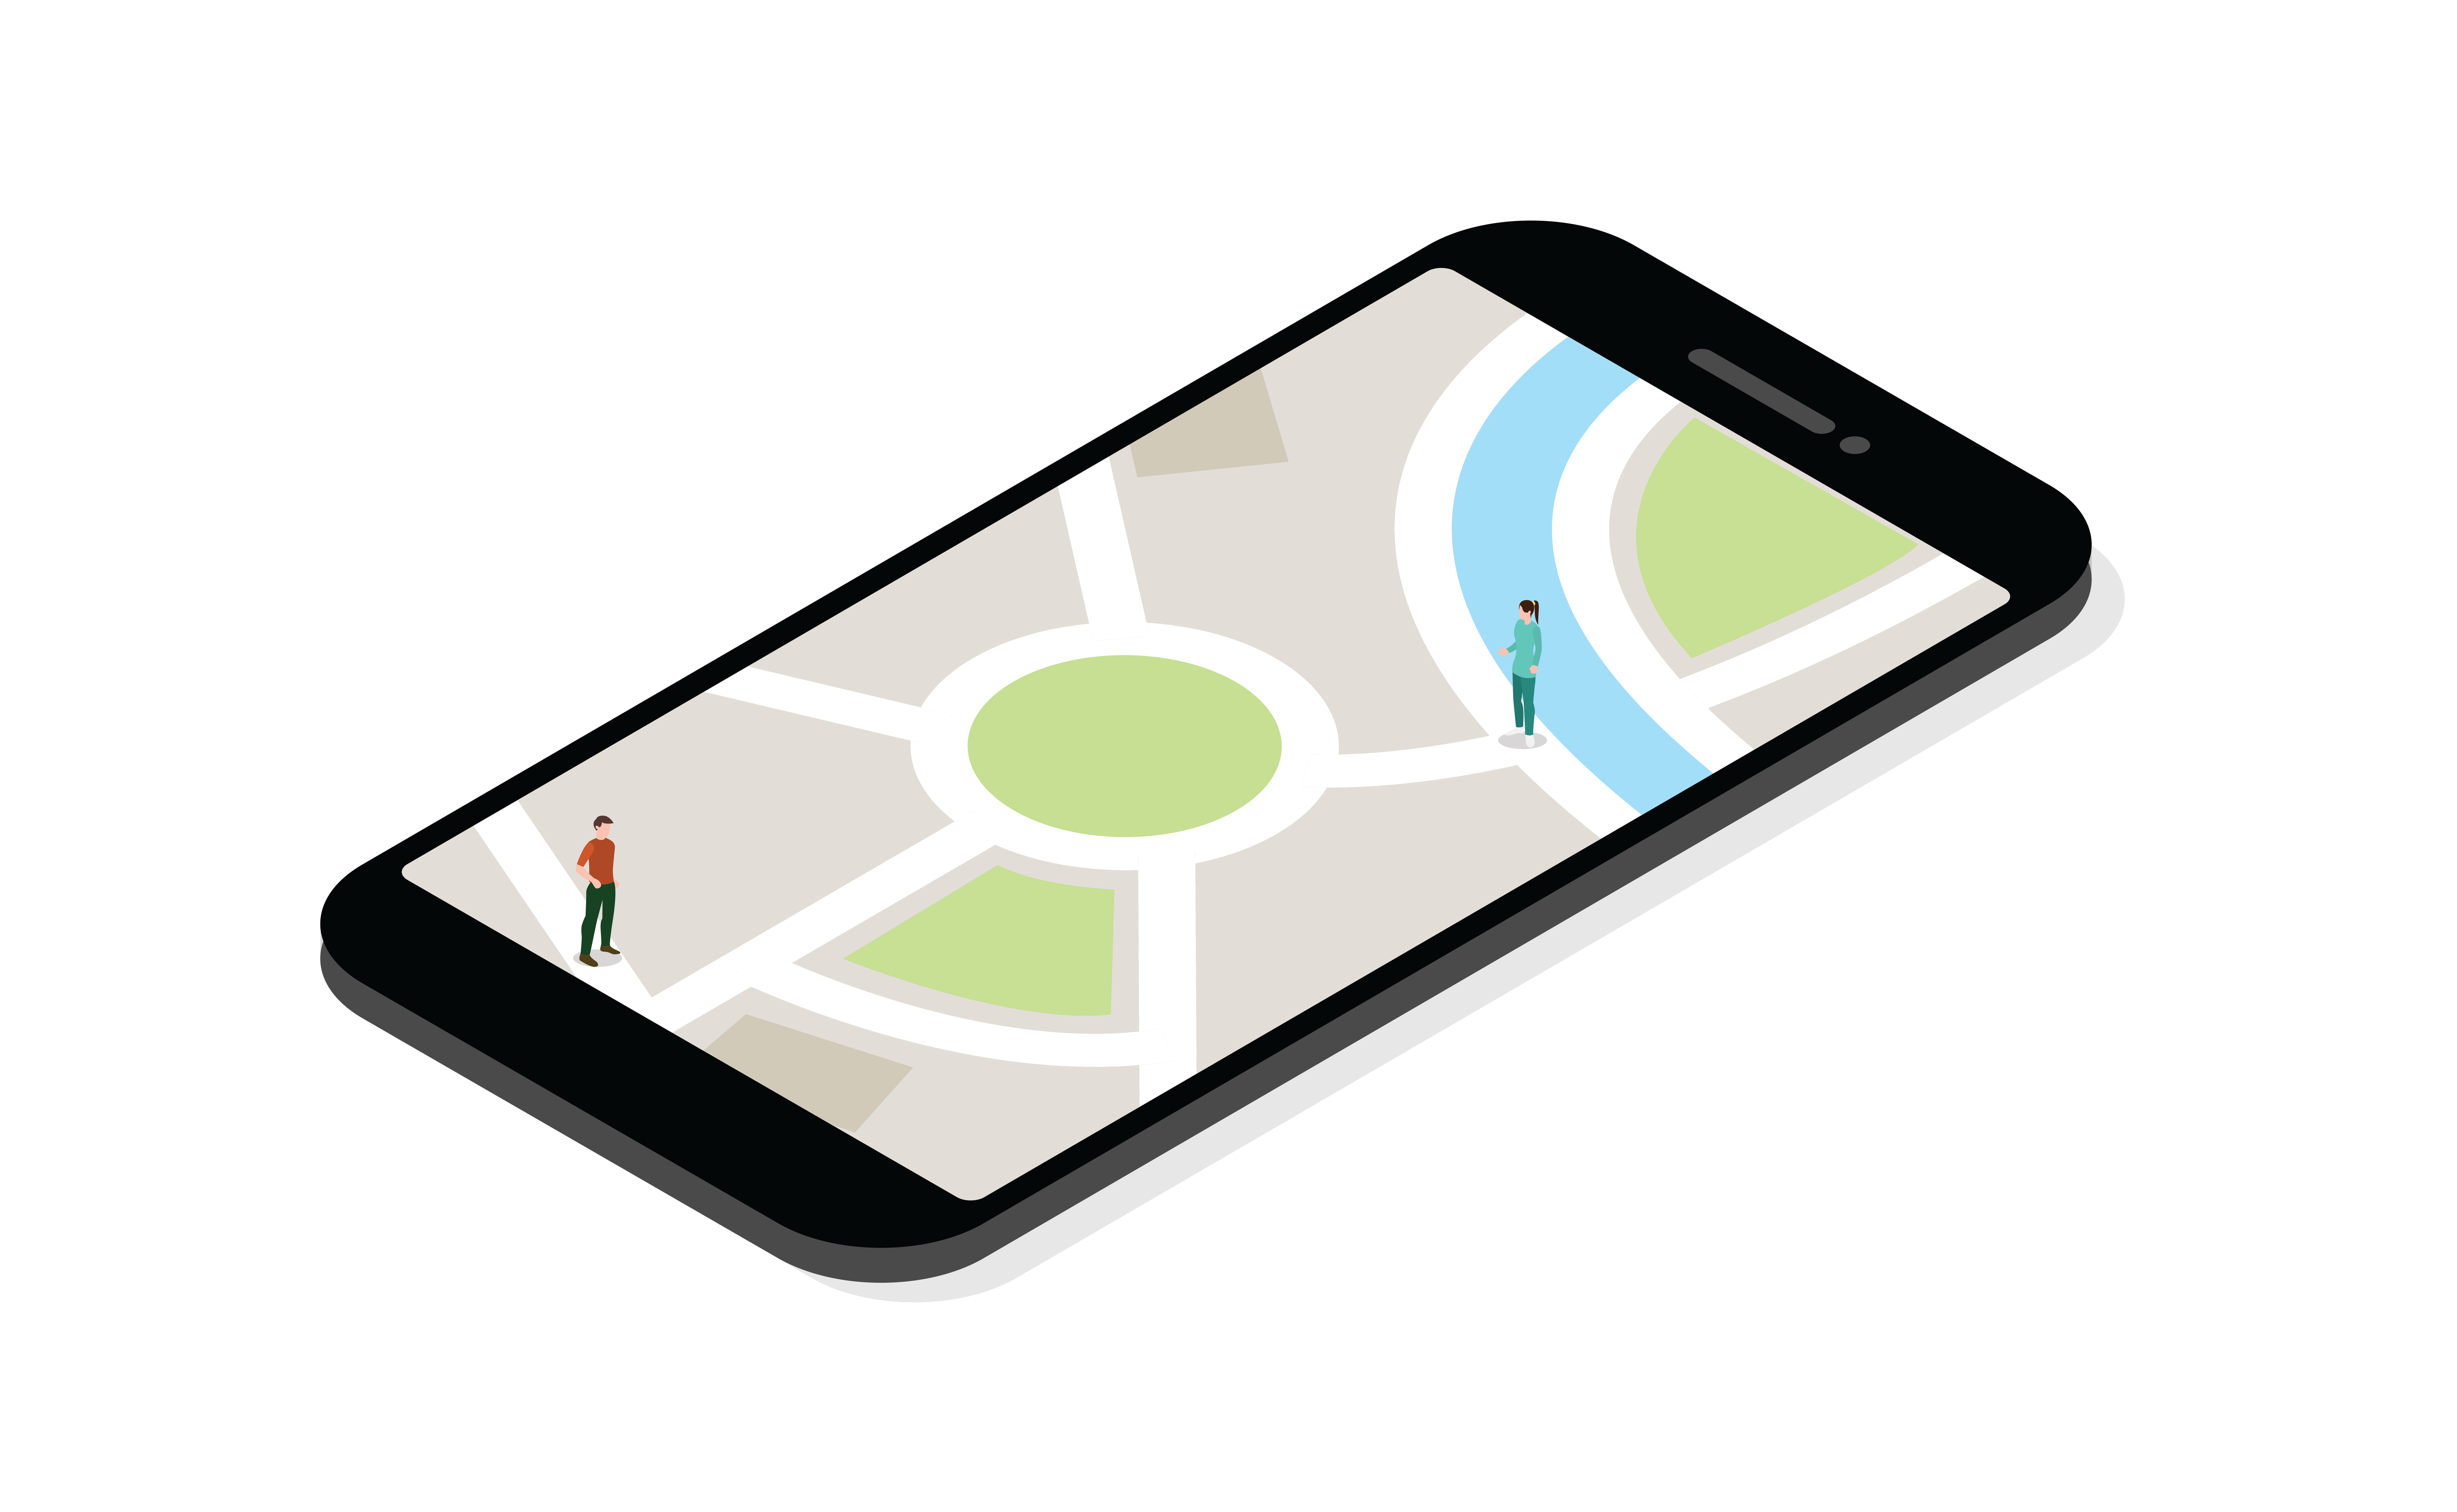 illustration of location sharing on an iPhone